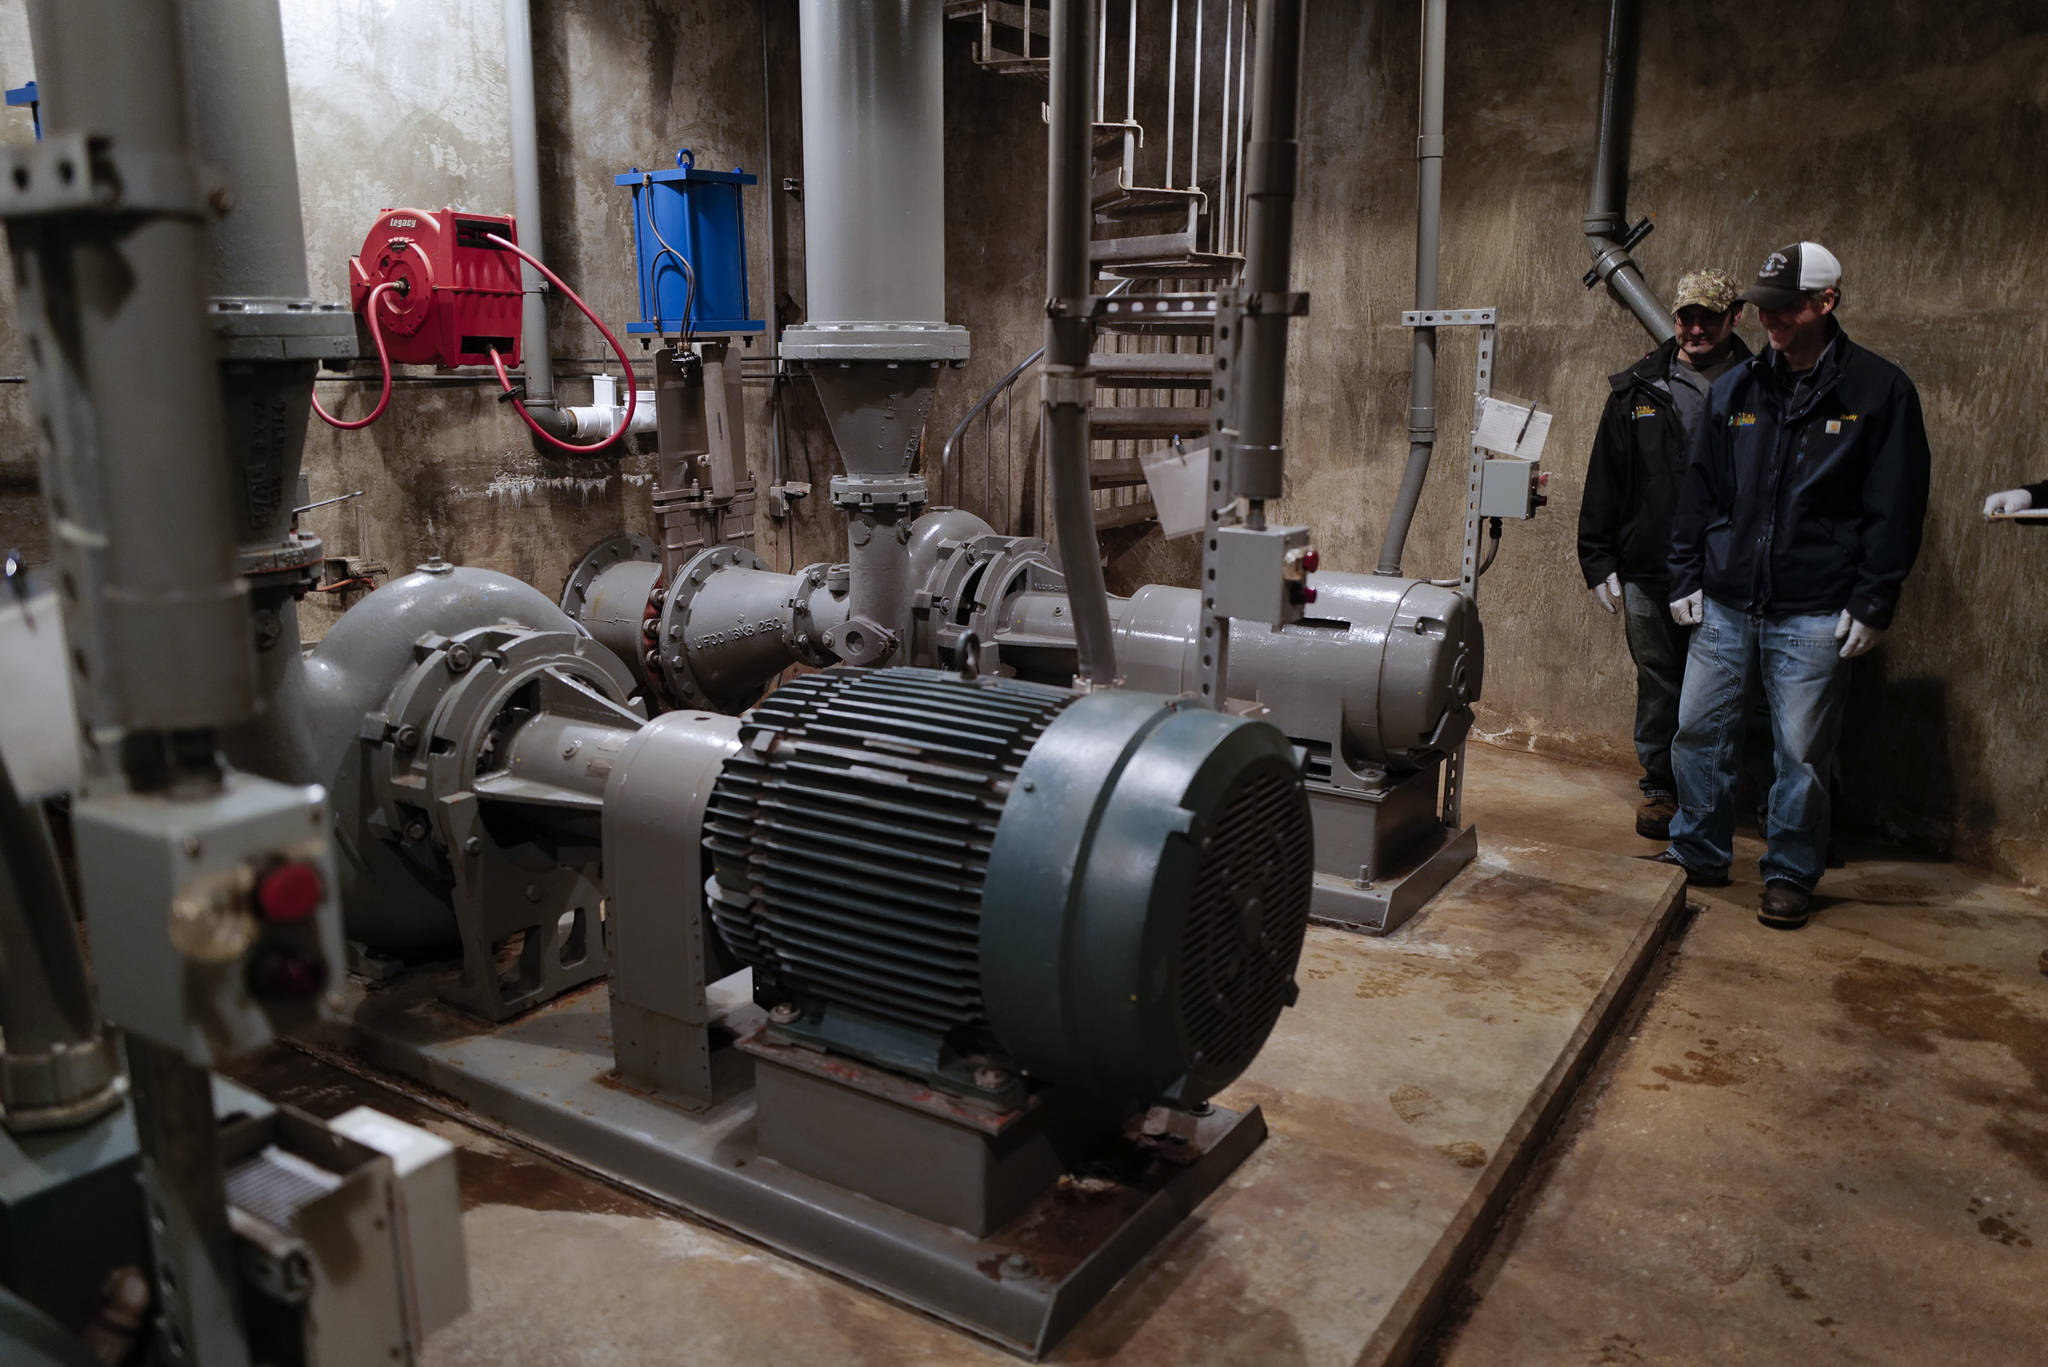 Otto Dunayski, left, and Scott Simonson, senior wastewater collection officers for the city, inspect three pumps three-story underground at the Outer Drive Pumping Station downtown on Friday, Oct. 11, 2019. The pumps were overwhelmed during last weekend’s storm that caused a backup of sewage into the Mayor Bill Overstreet Park utilities building. (Michael Penn | Juneau Empire)